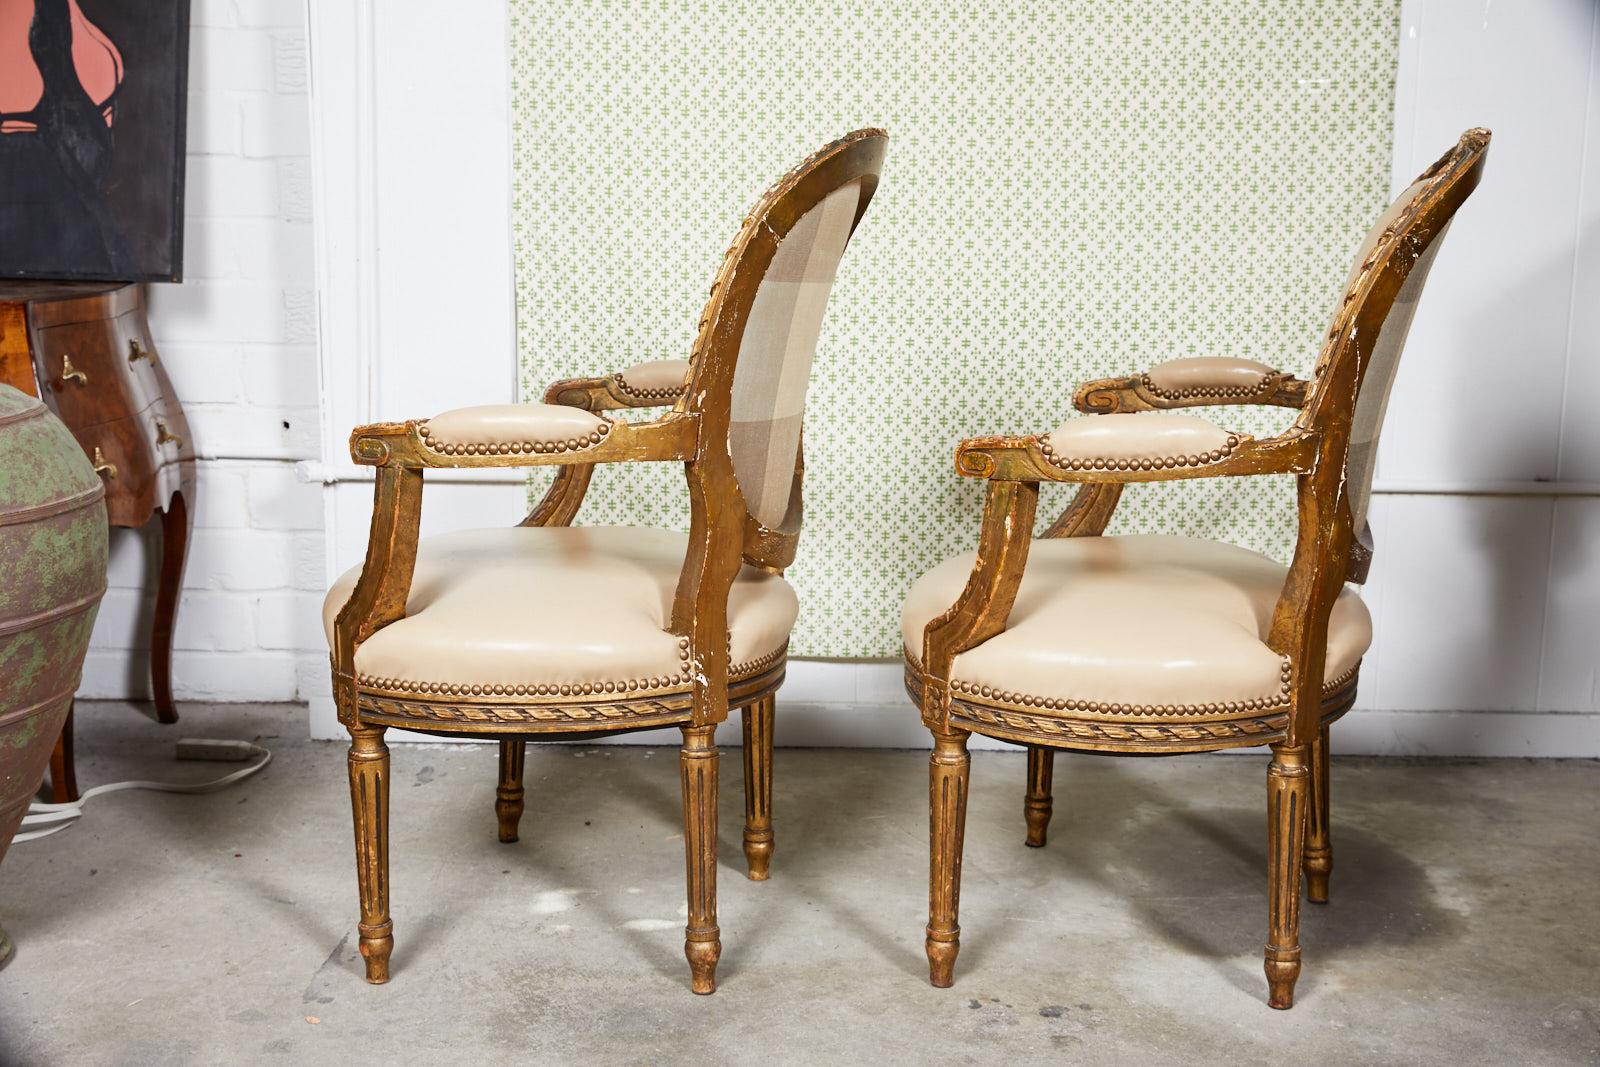 Late 19th century pair of French fauteuils or armchairs in the Louis XVI style with carved and gilded frames. The chairs are beautifully upholstered in a taupe leather with decorative bronze finished nailhead trim and a contrasting neutral plaid